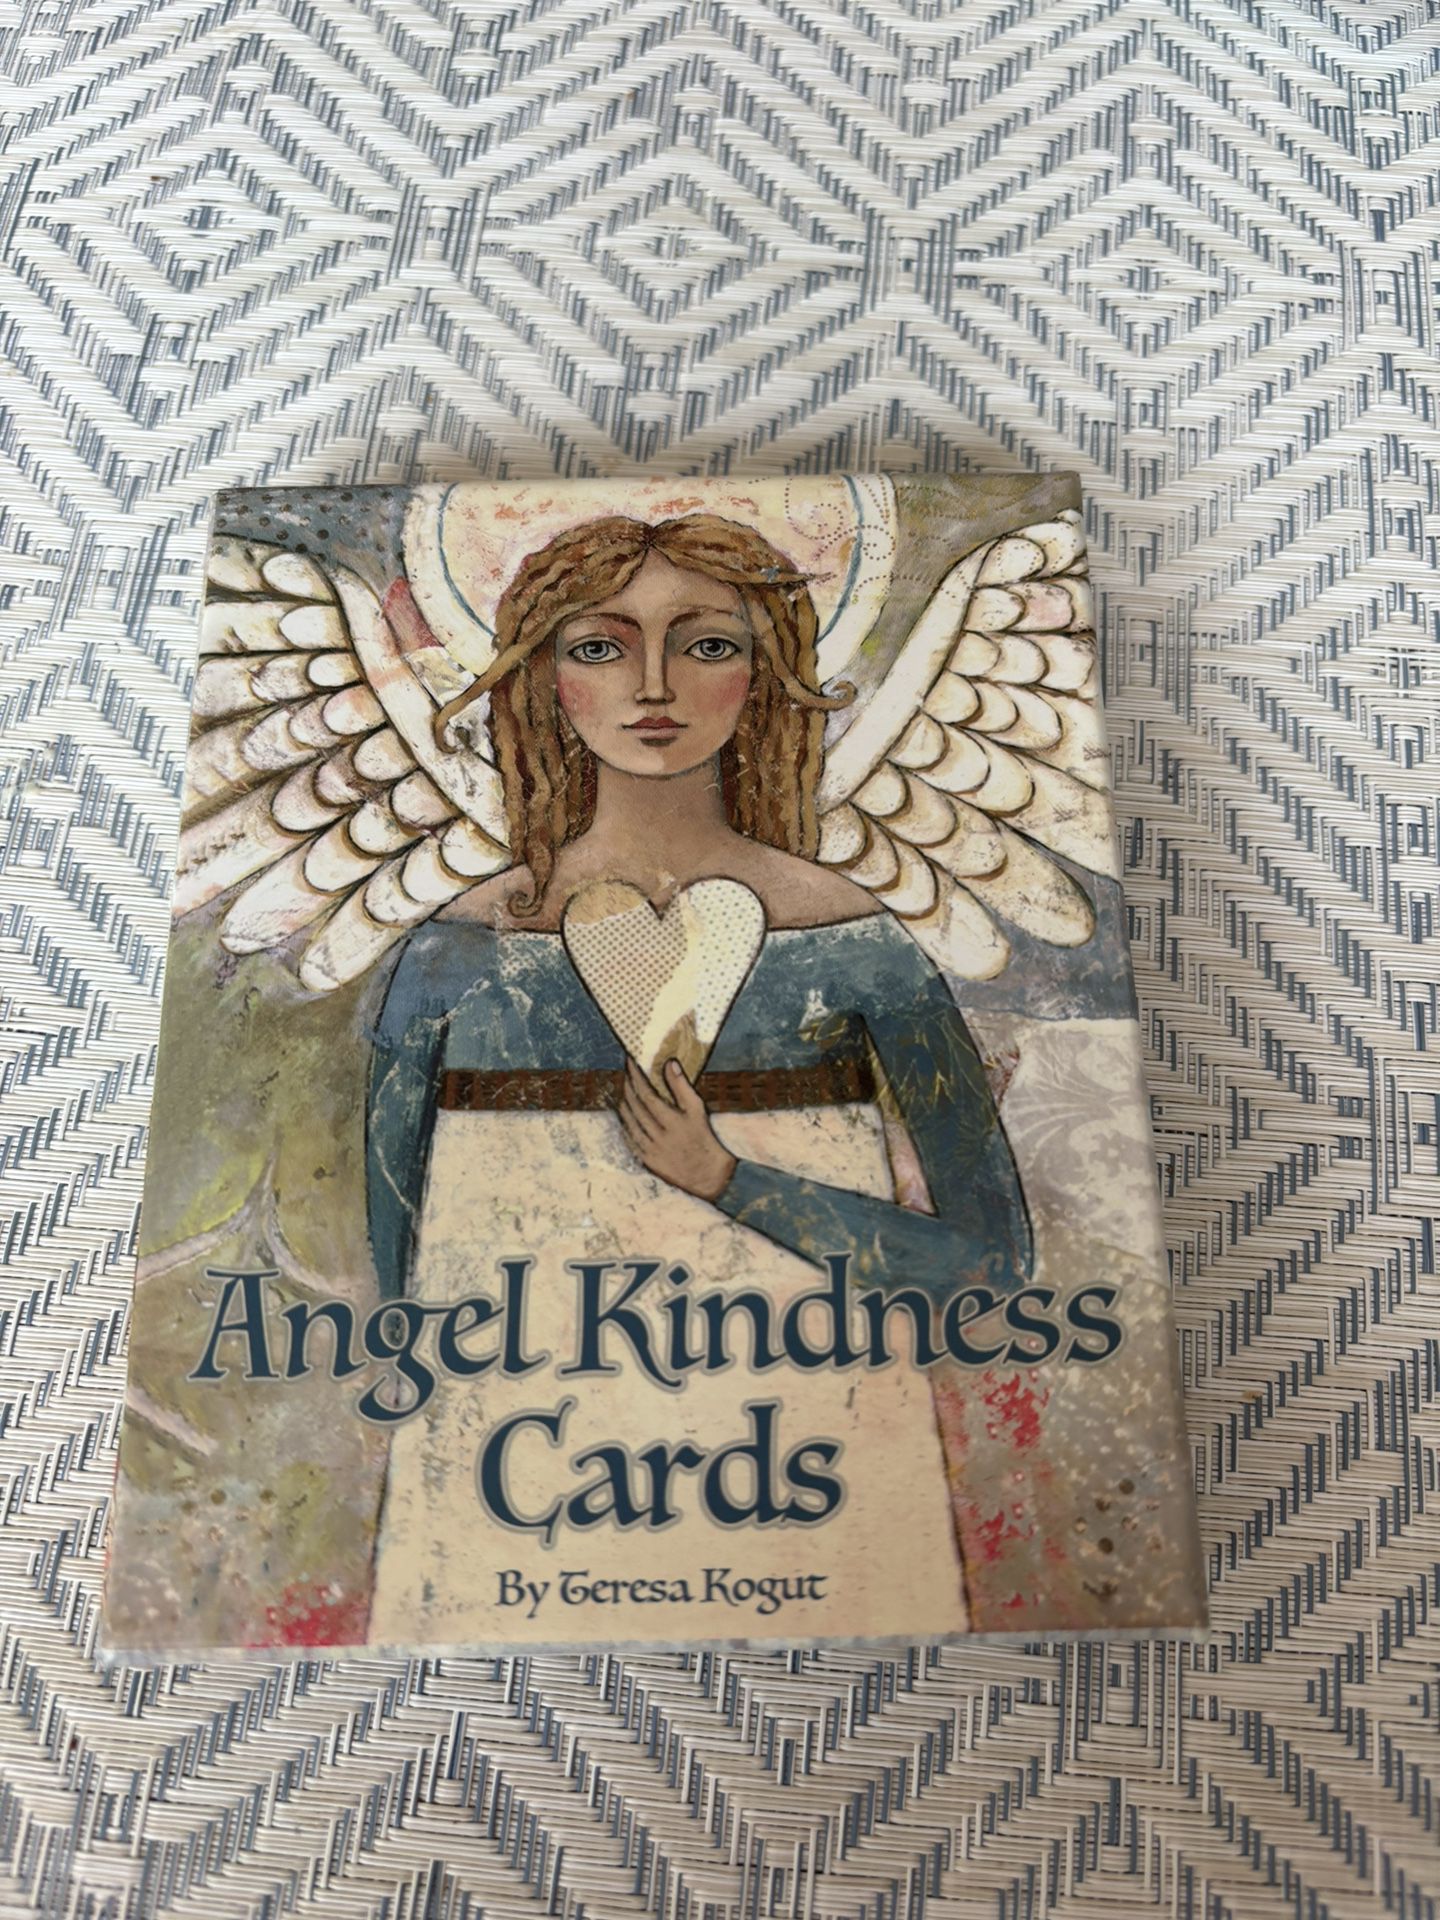 Angel Cards Double Sided 52 Cards In Box Gently Used Very Uplift